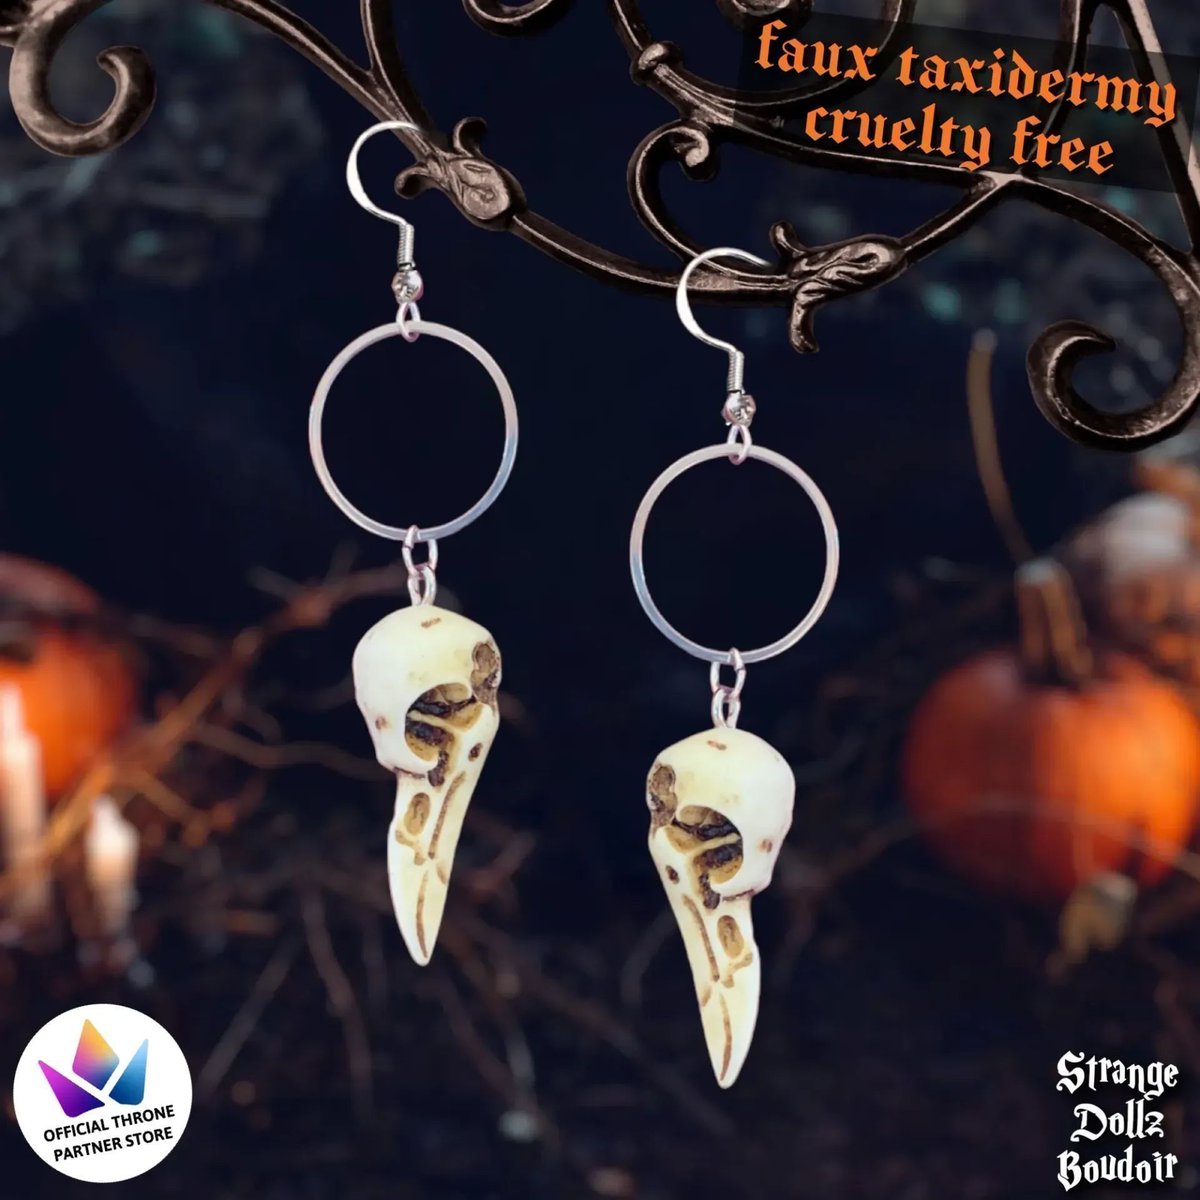 💀🐦‍⬛New faux taxidermy jewellery, handmade with resin, #crueltyfree available here : strange-dollz-boudoir.myshopify.com 🎁👑Or add to your #Throne wishlist as we are a partner store : throne.com/products/brand… 👑  #raven #twitchtv #wishlist #vtuber #gothic #halloween #taxidermy #goth